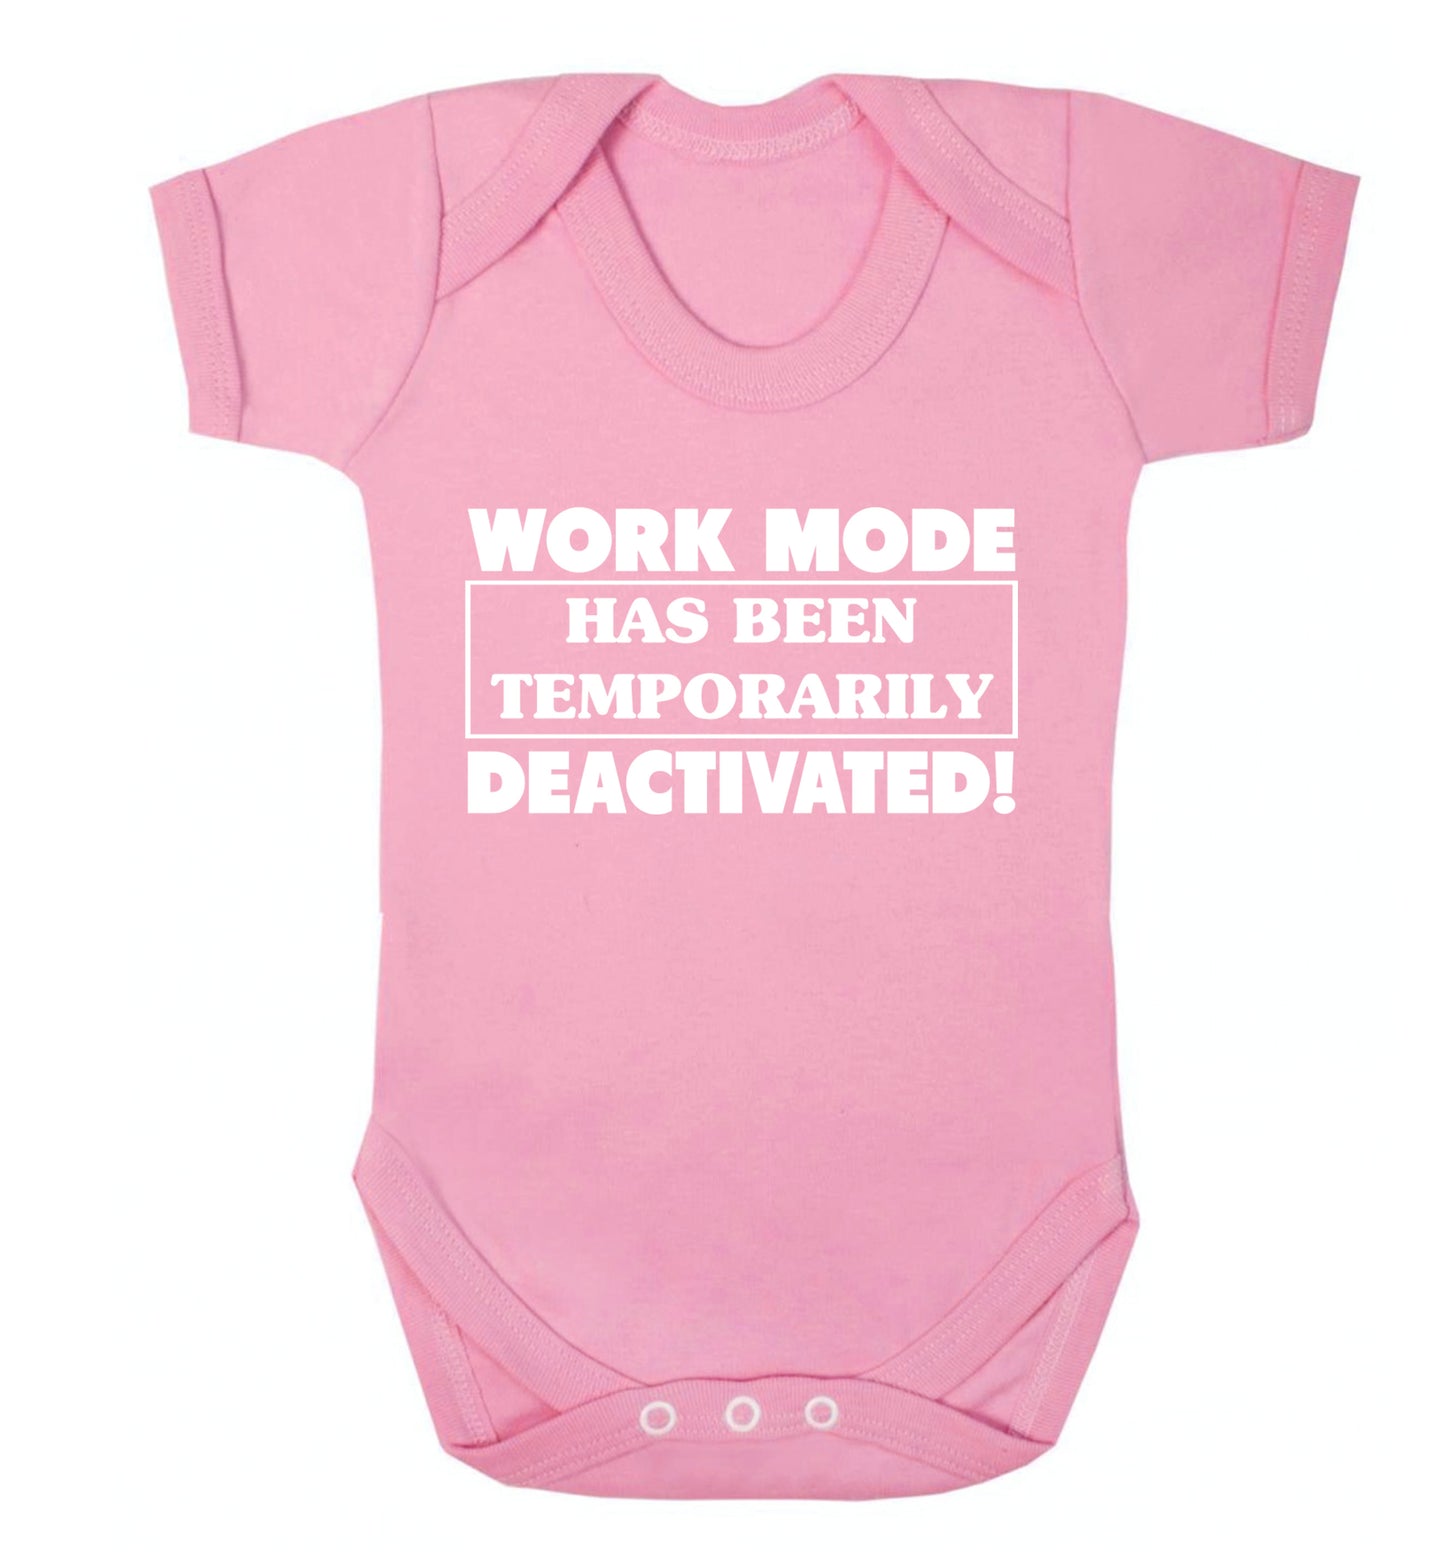 Work mode has now been temporarily deactivated Baby Vest pale pink 18-24 months